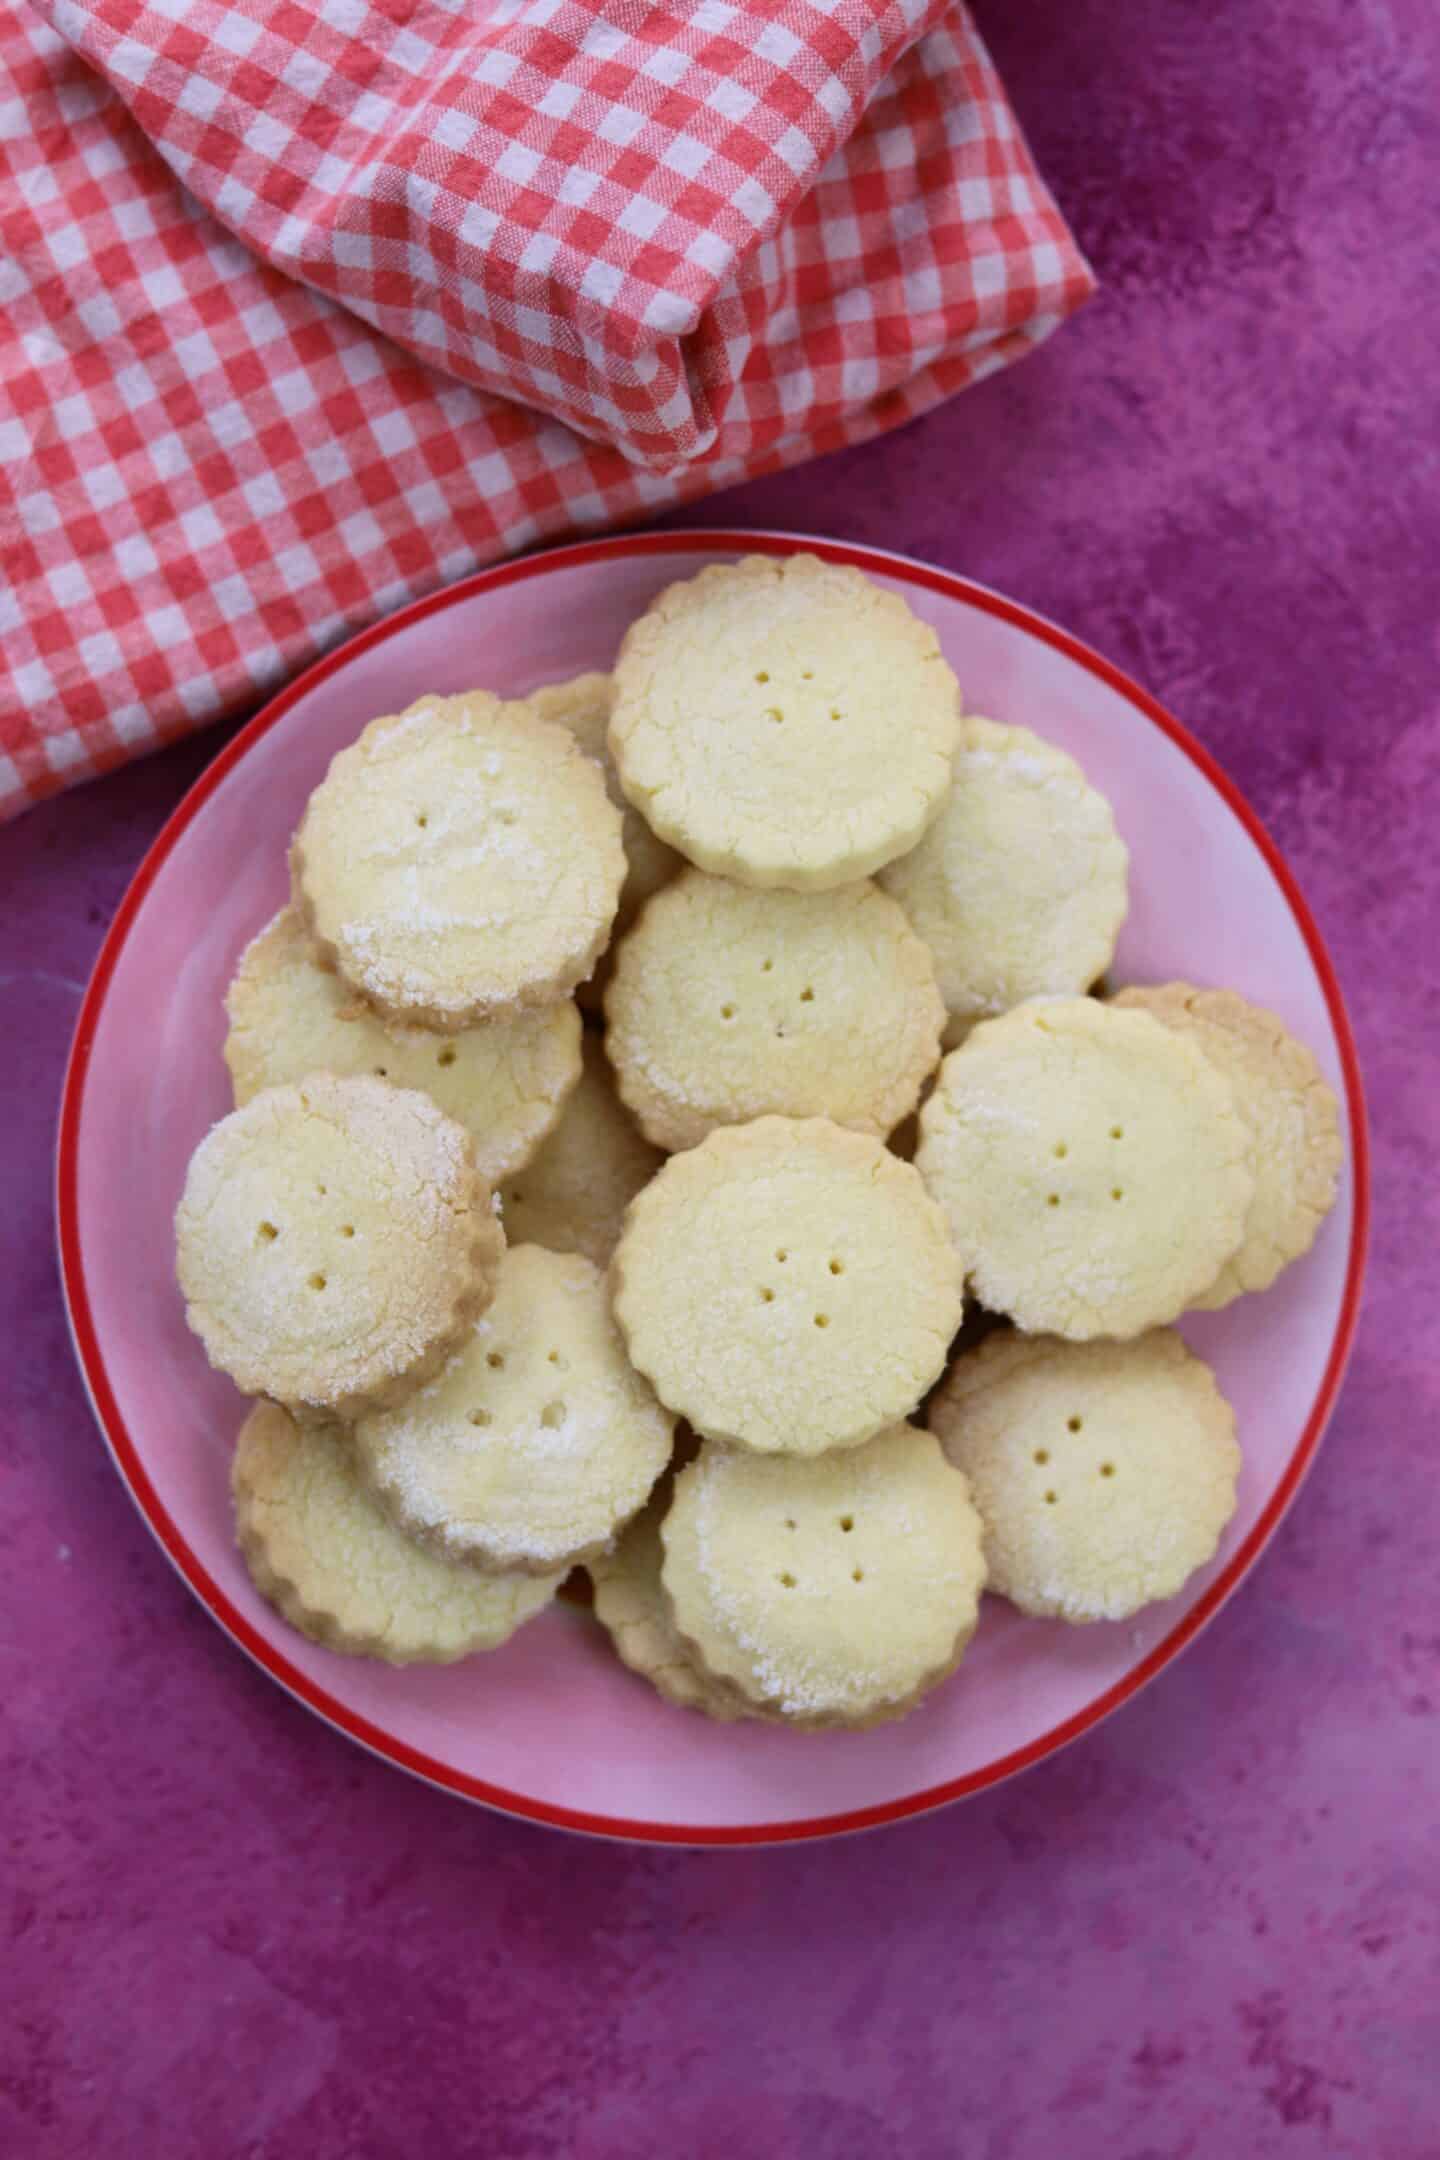 A plate of gluten free shortbread biscuits.